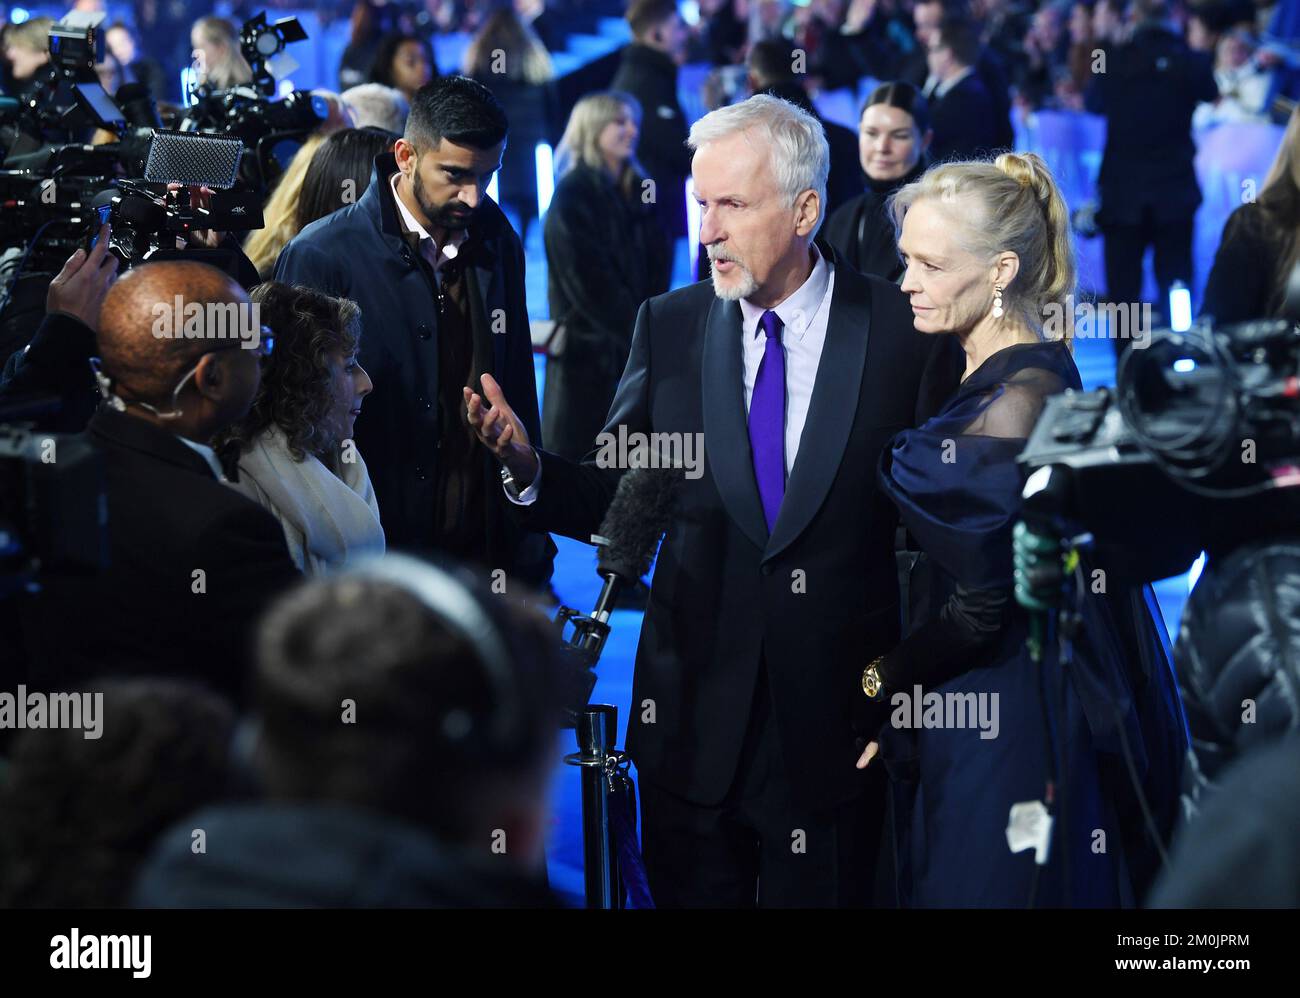 London, UK. 20th Feb, 2016. American director James Cameron and actress Suzy Amis Cameron attend the world premiere of Avatar: The Way Of Water at Odeon Luxe, Leicester Square, London on Tuesday, December 6, 2022. Photo by Rune Hellestad/ Credit: UPI/Alamy Live News Stock Photo